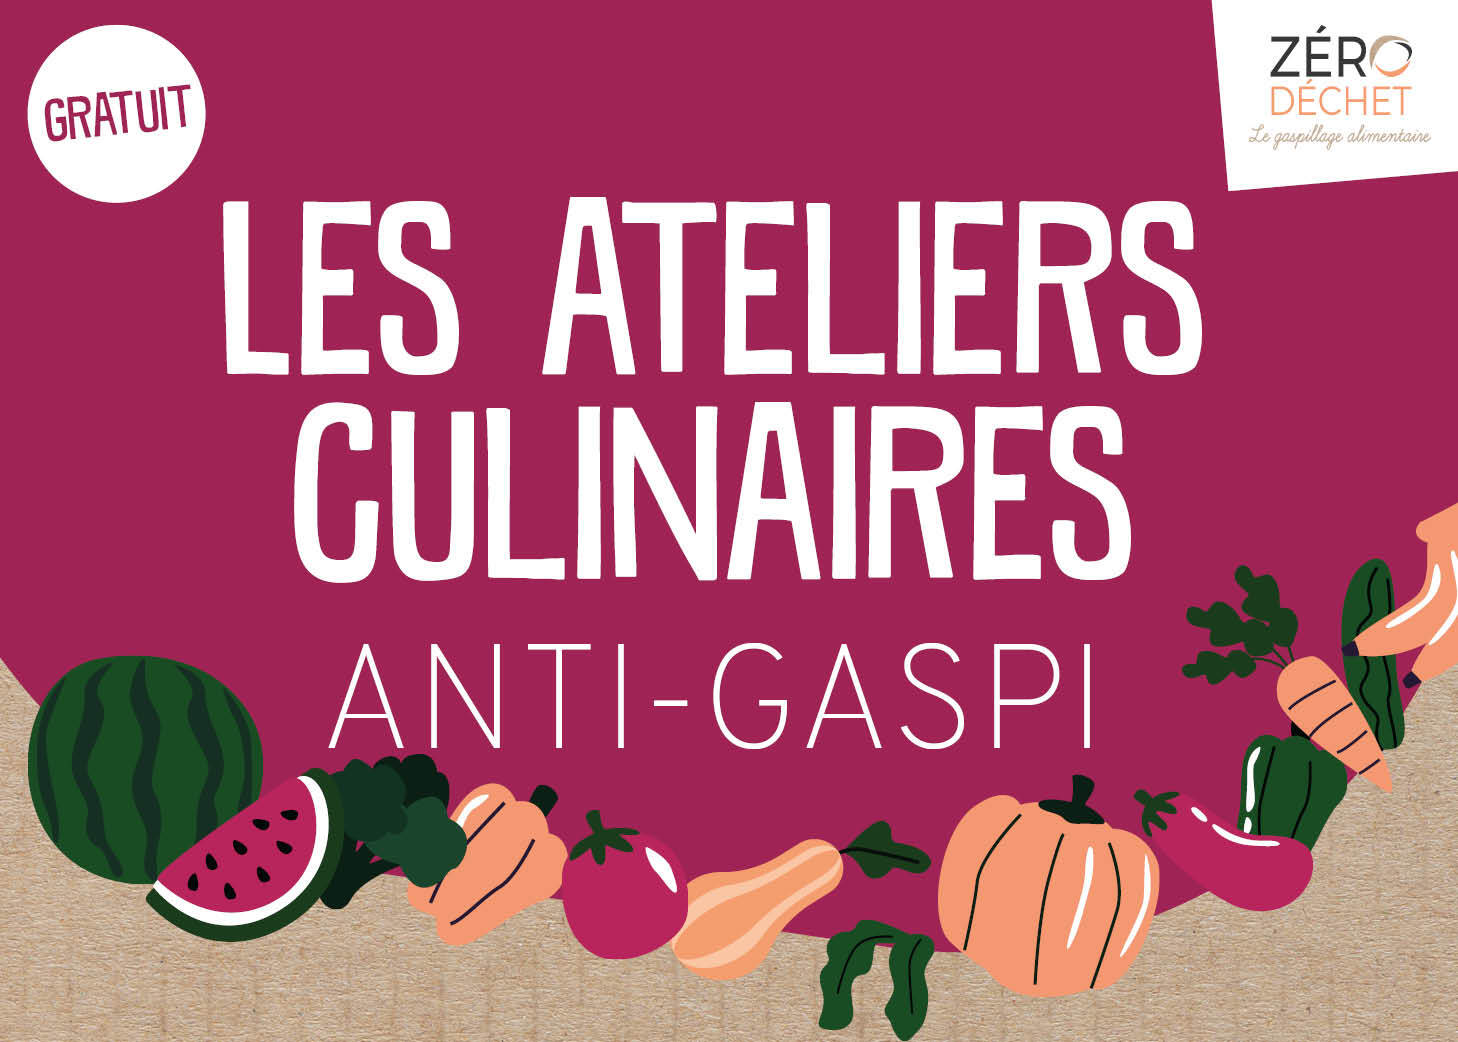 om-les ateliers culinaires anti-gaspi